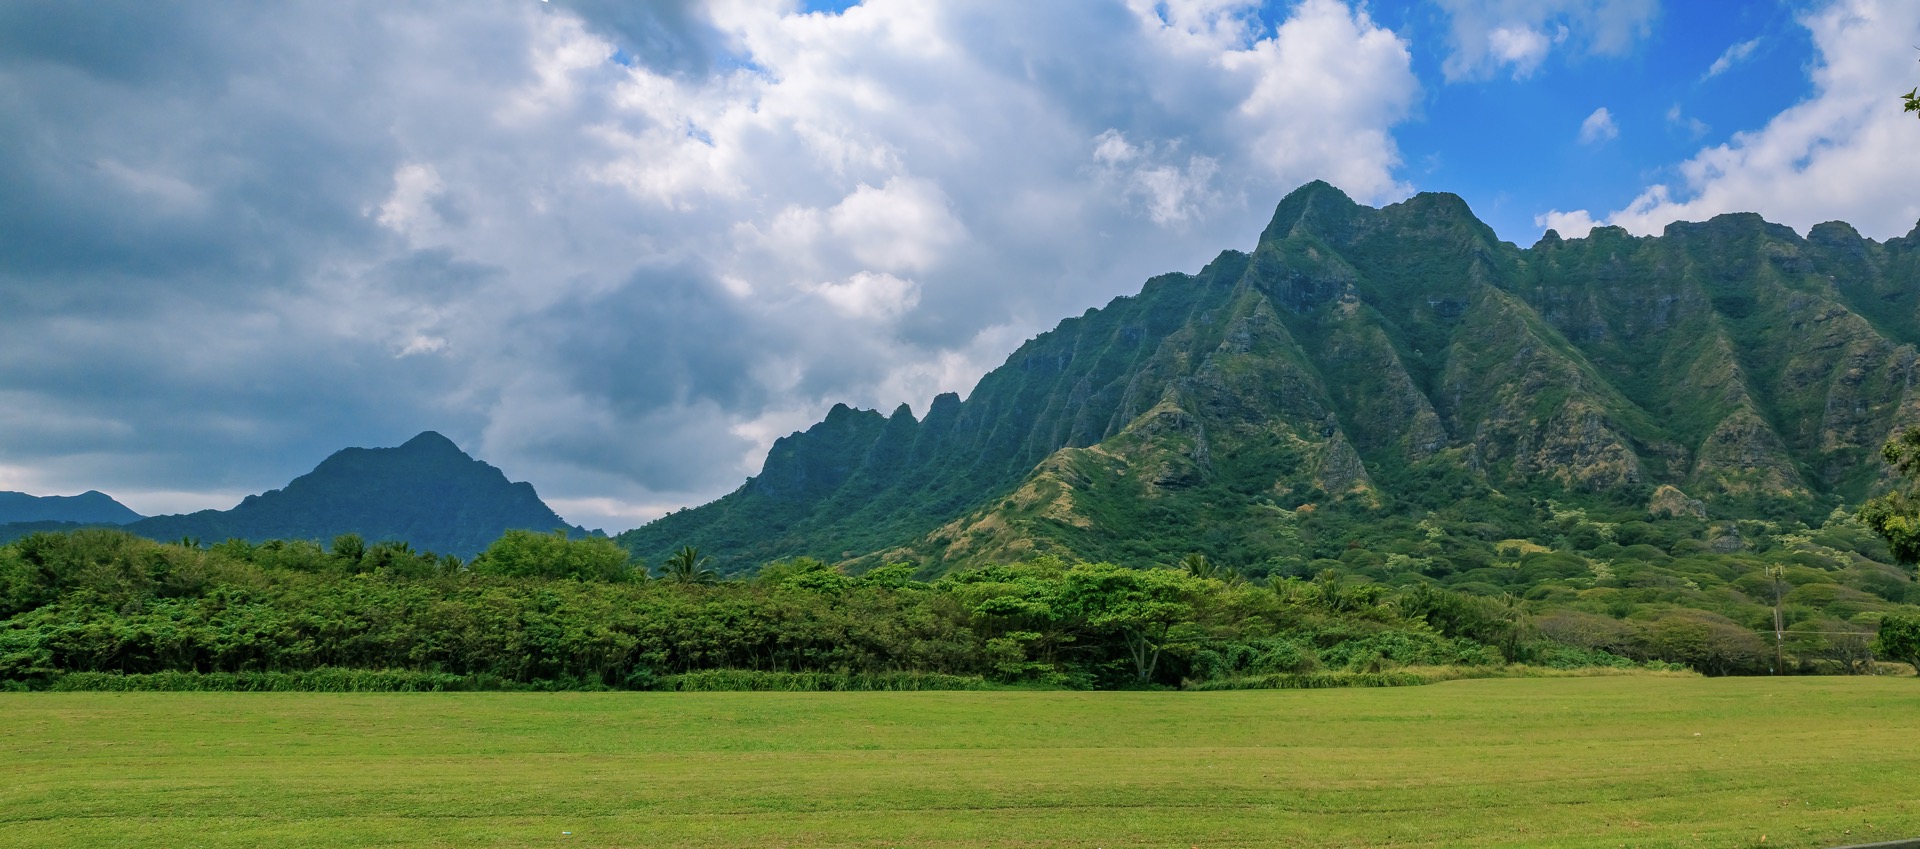 Chinaman’s Hat & Jurassic Park Mountains  - Favorite Spot For Photo Shooting - East Side